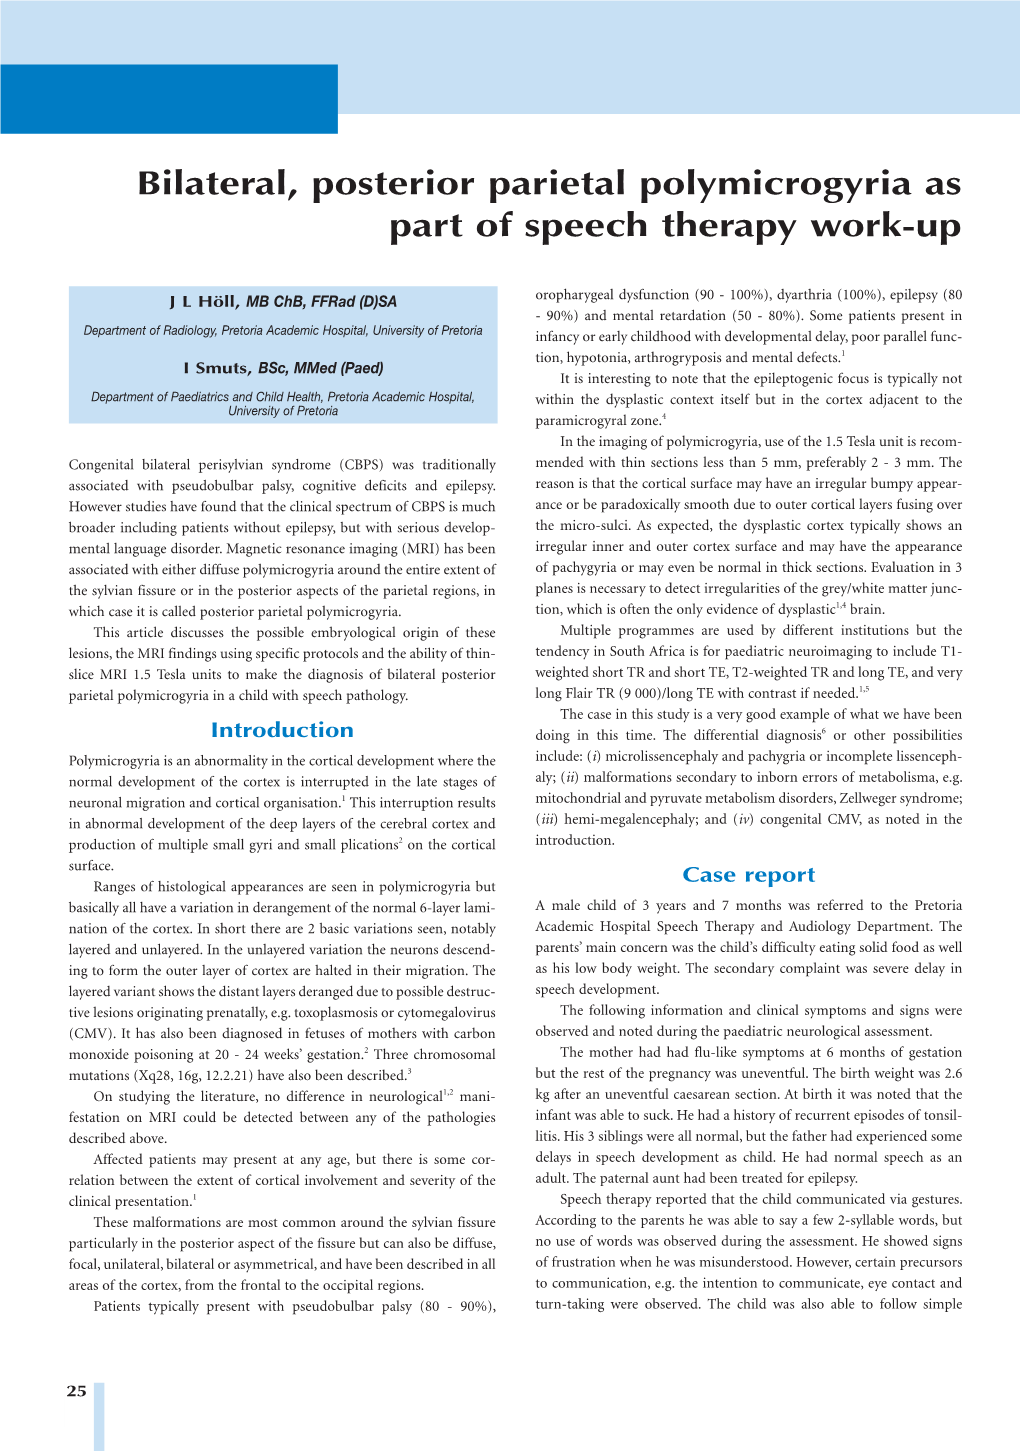 Bilateral, Posterior Parietal Polymicrogyria As Part of Speech Therapy Work-Up